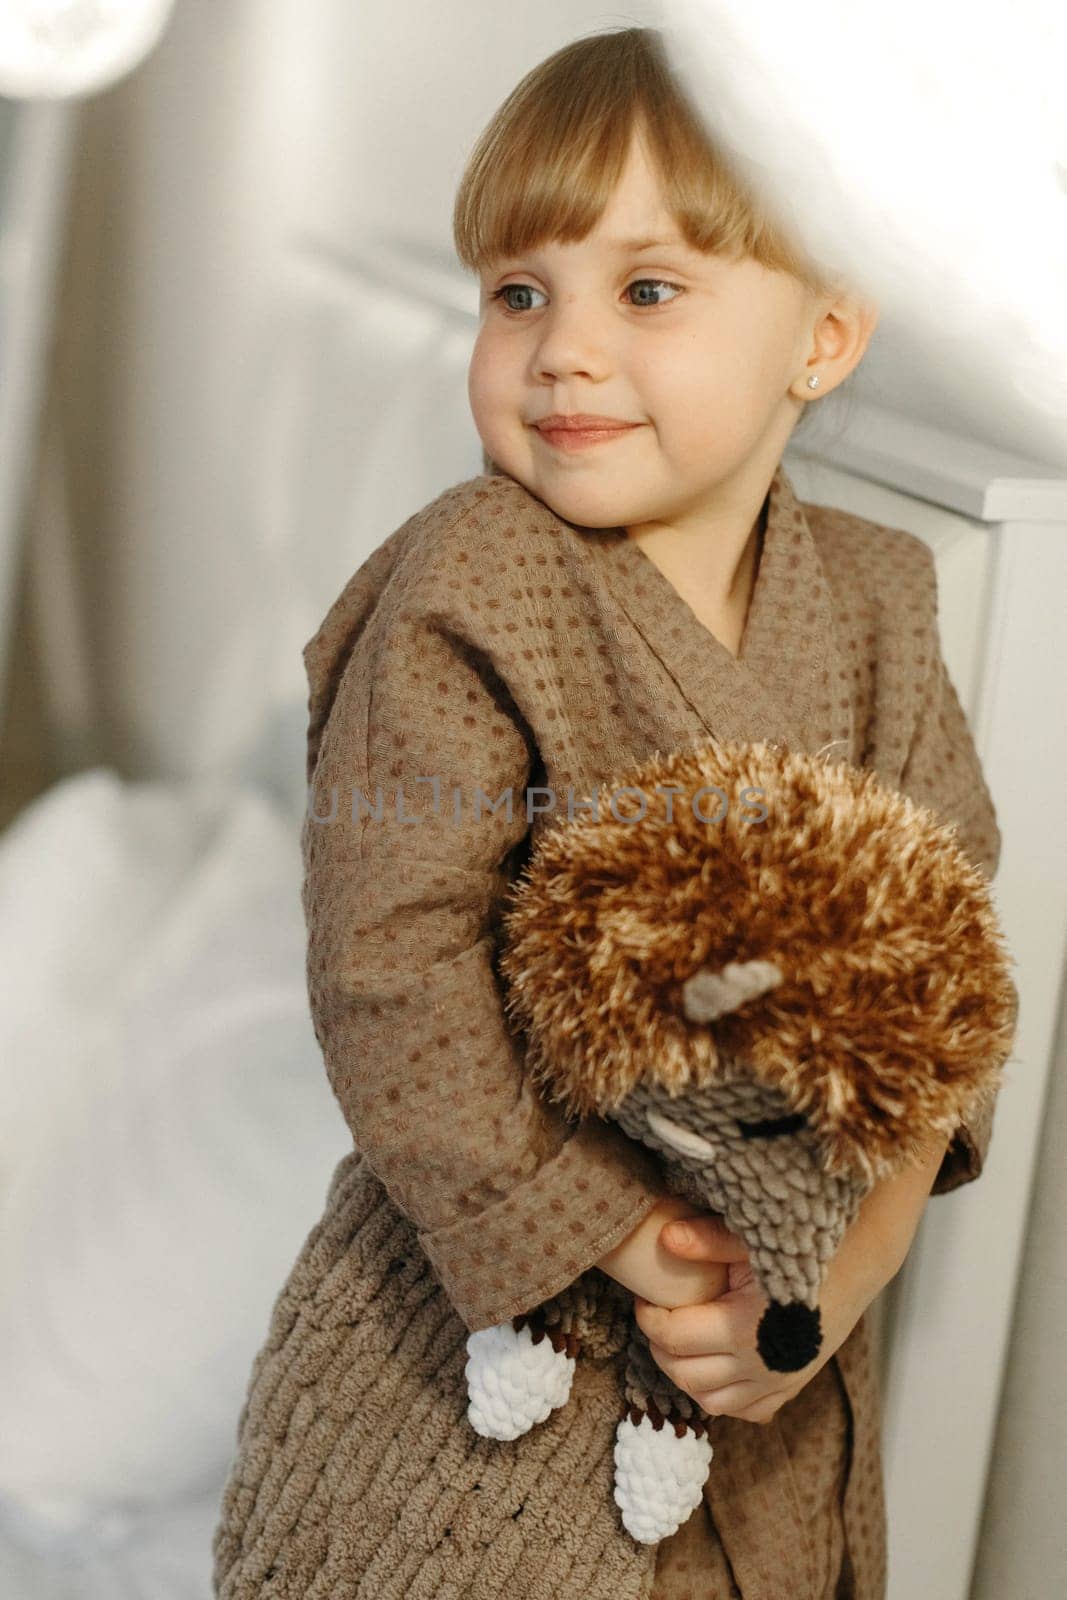 A girl in a dressing gown plays with a knitted hedgehog in the room.